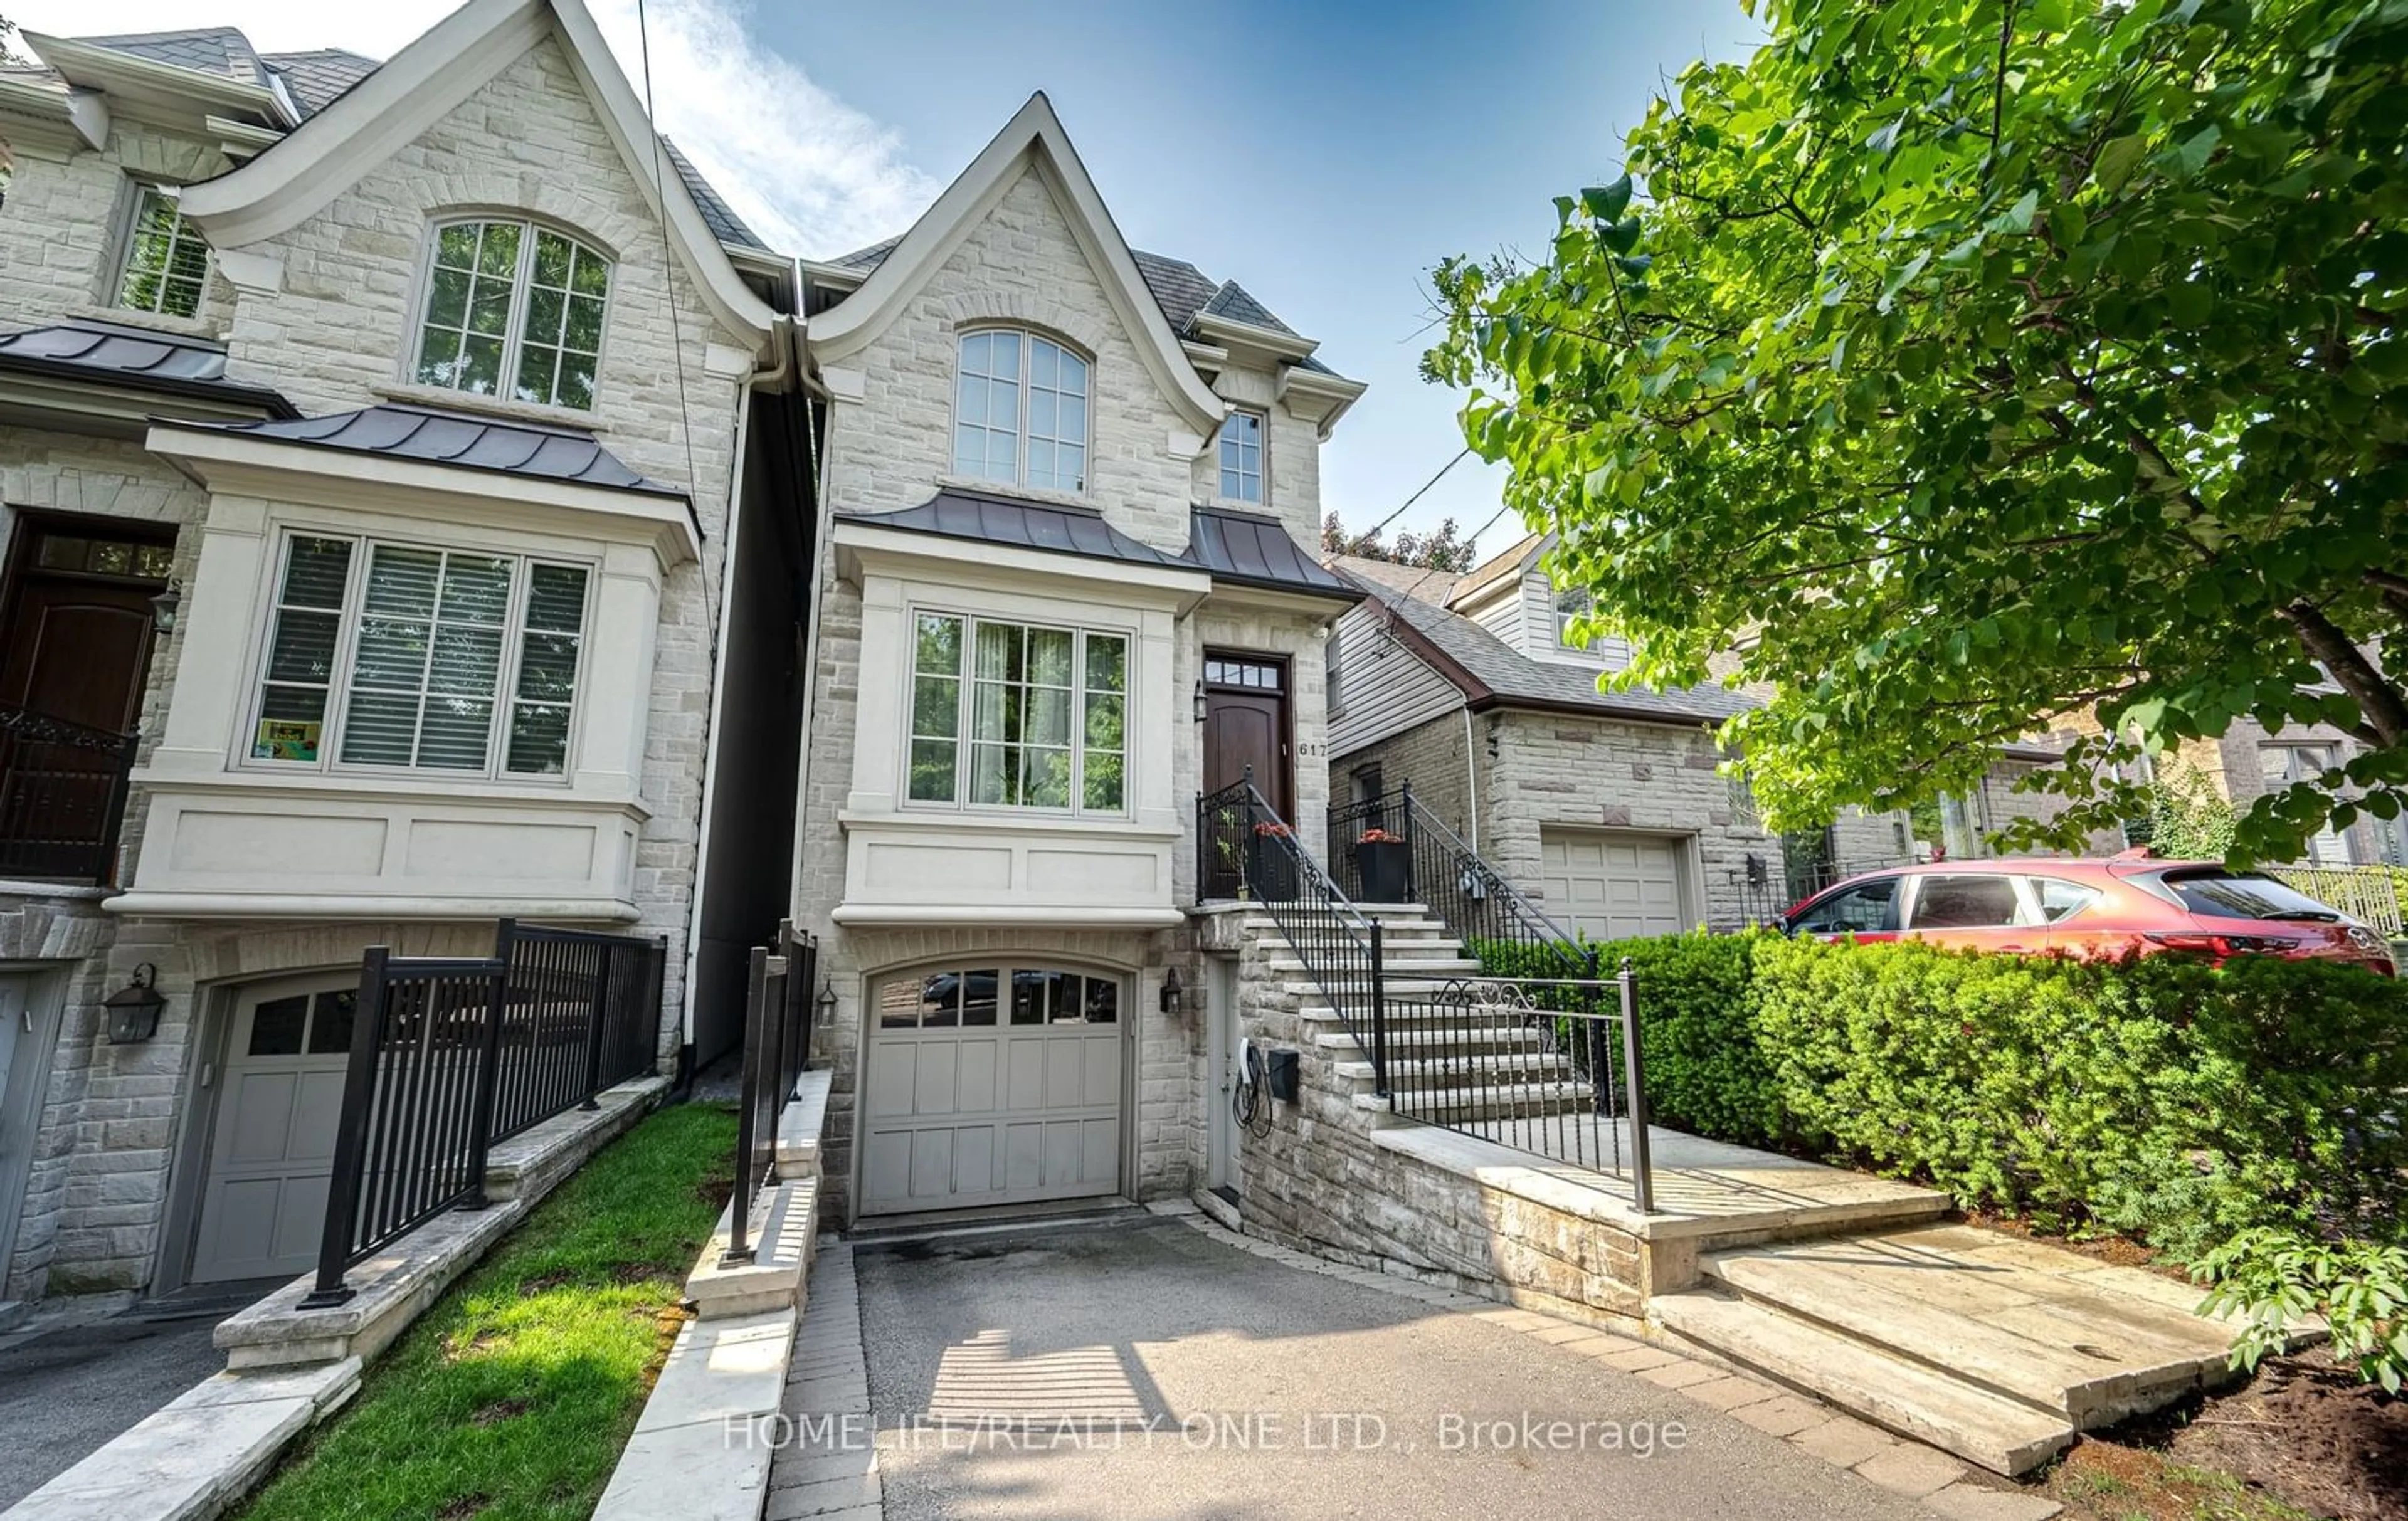 Frontside or backside of a home for 617 Woburn Ave, Toronto Ontario M5M 1M2